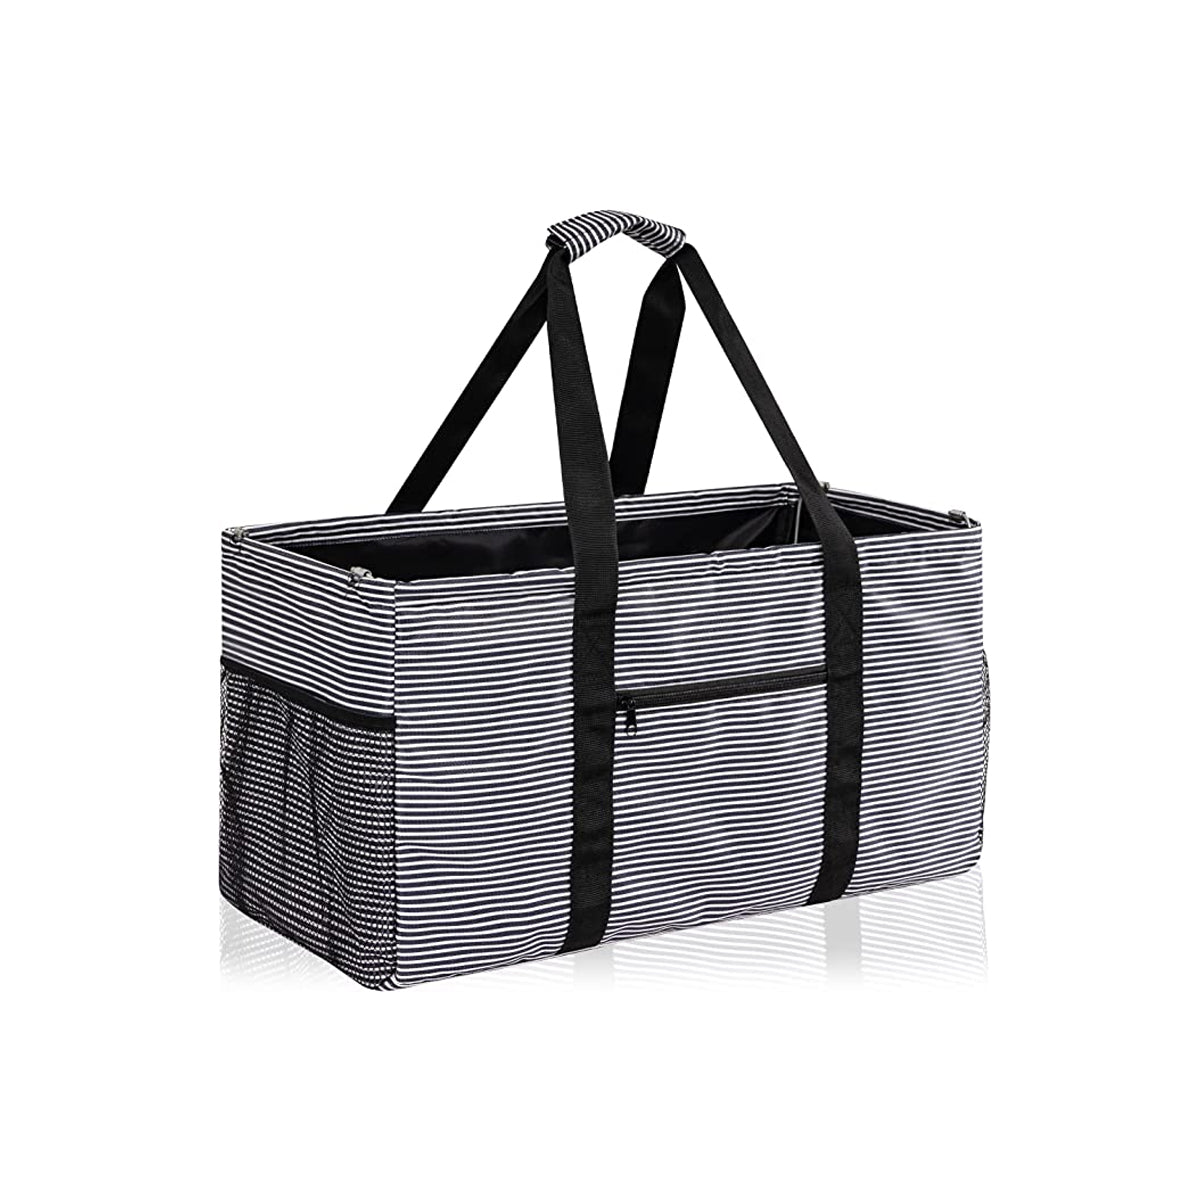 Collapsible Tote Bag with Handles Square Structured Tote Bag